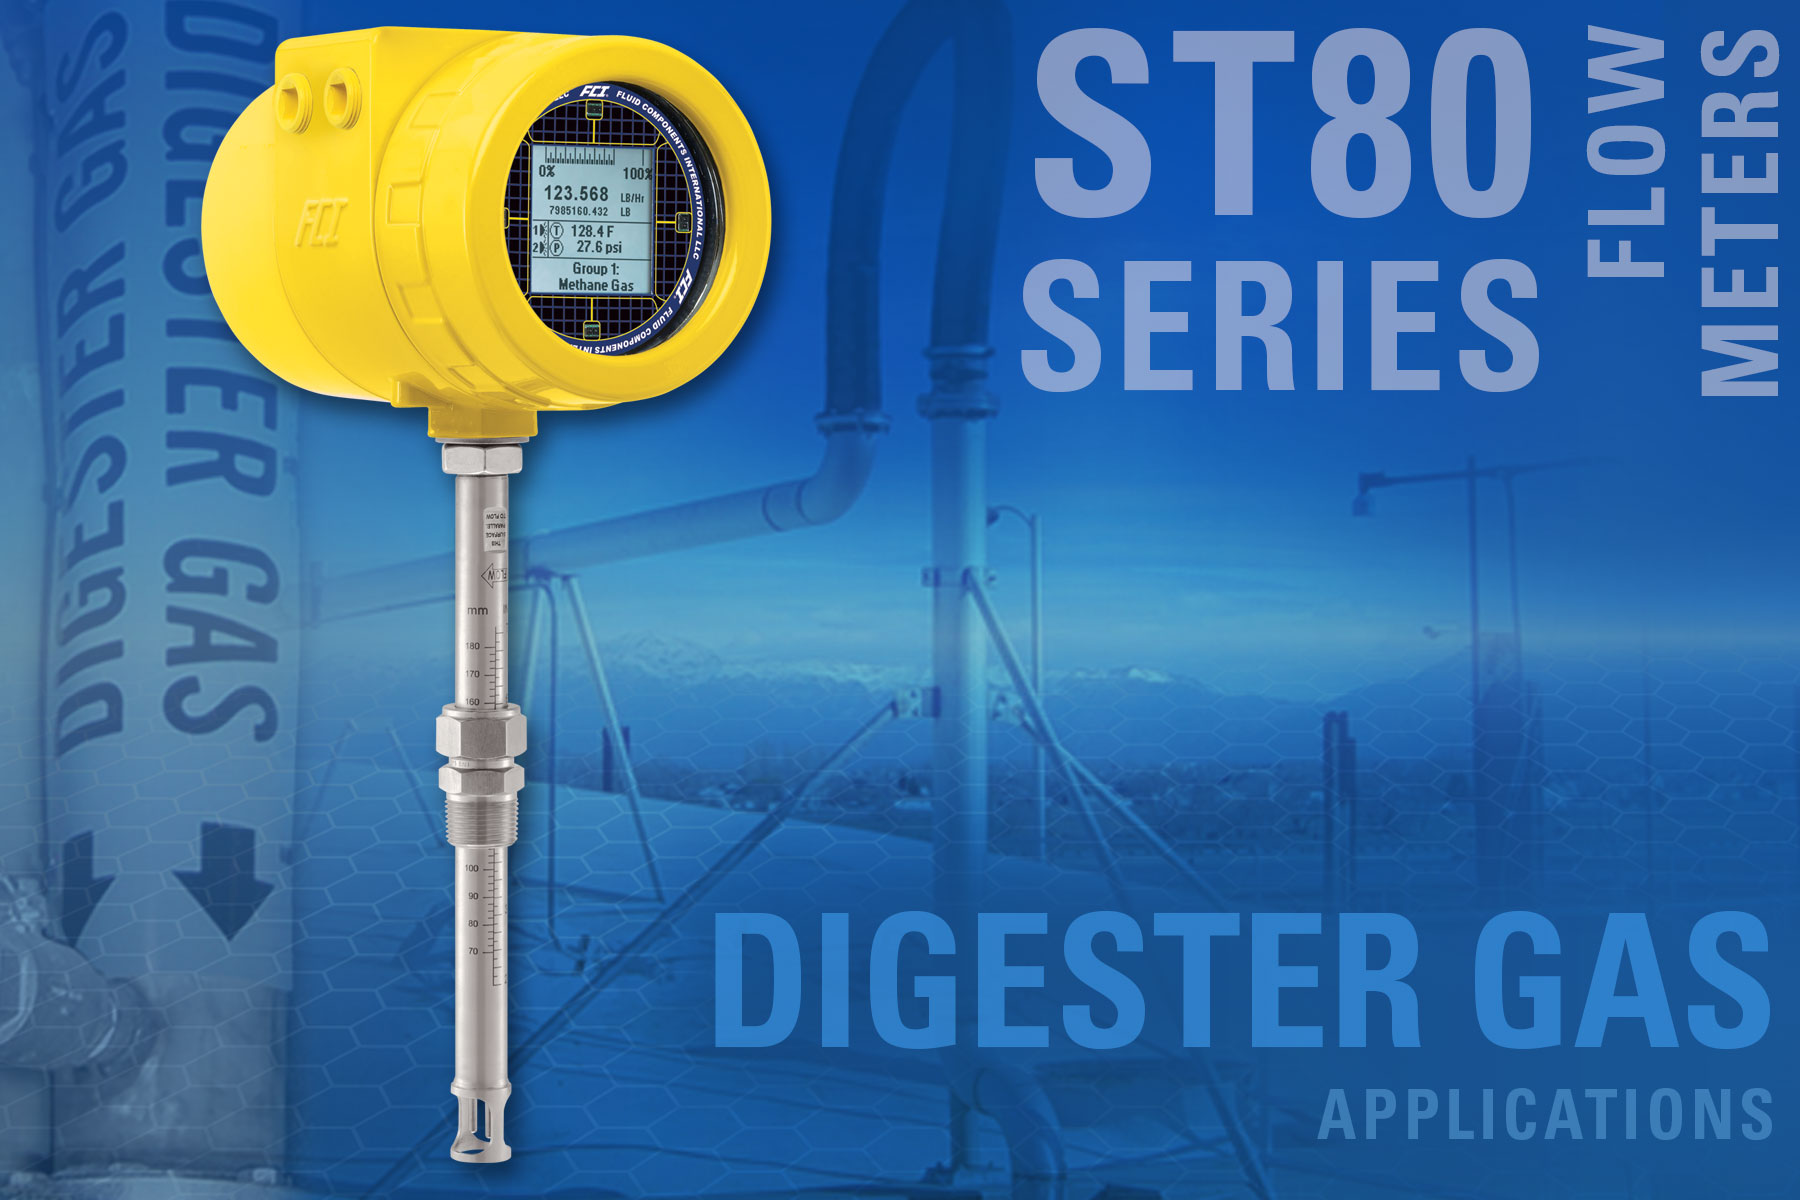 Rugged ST80 Digester Gas Flow Meter Provides Accurate, Safe, & Compliant Measurement